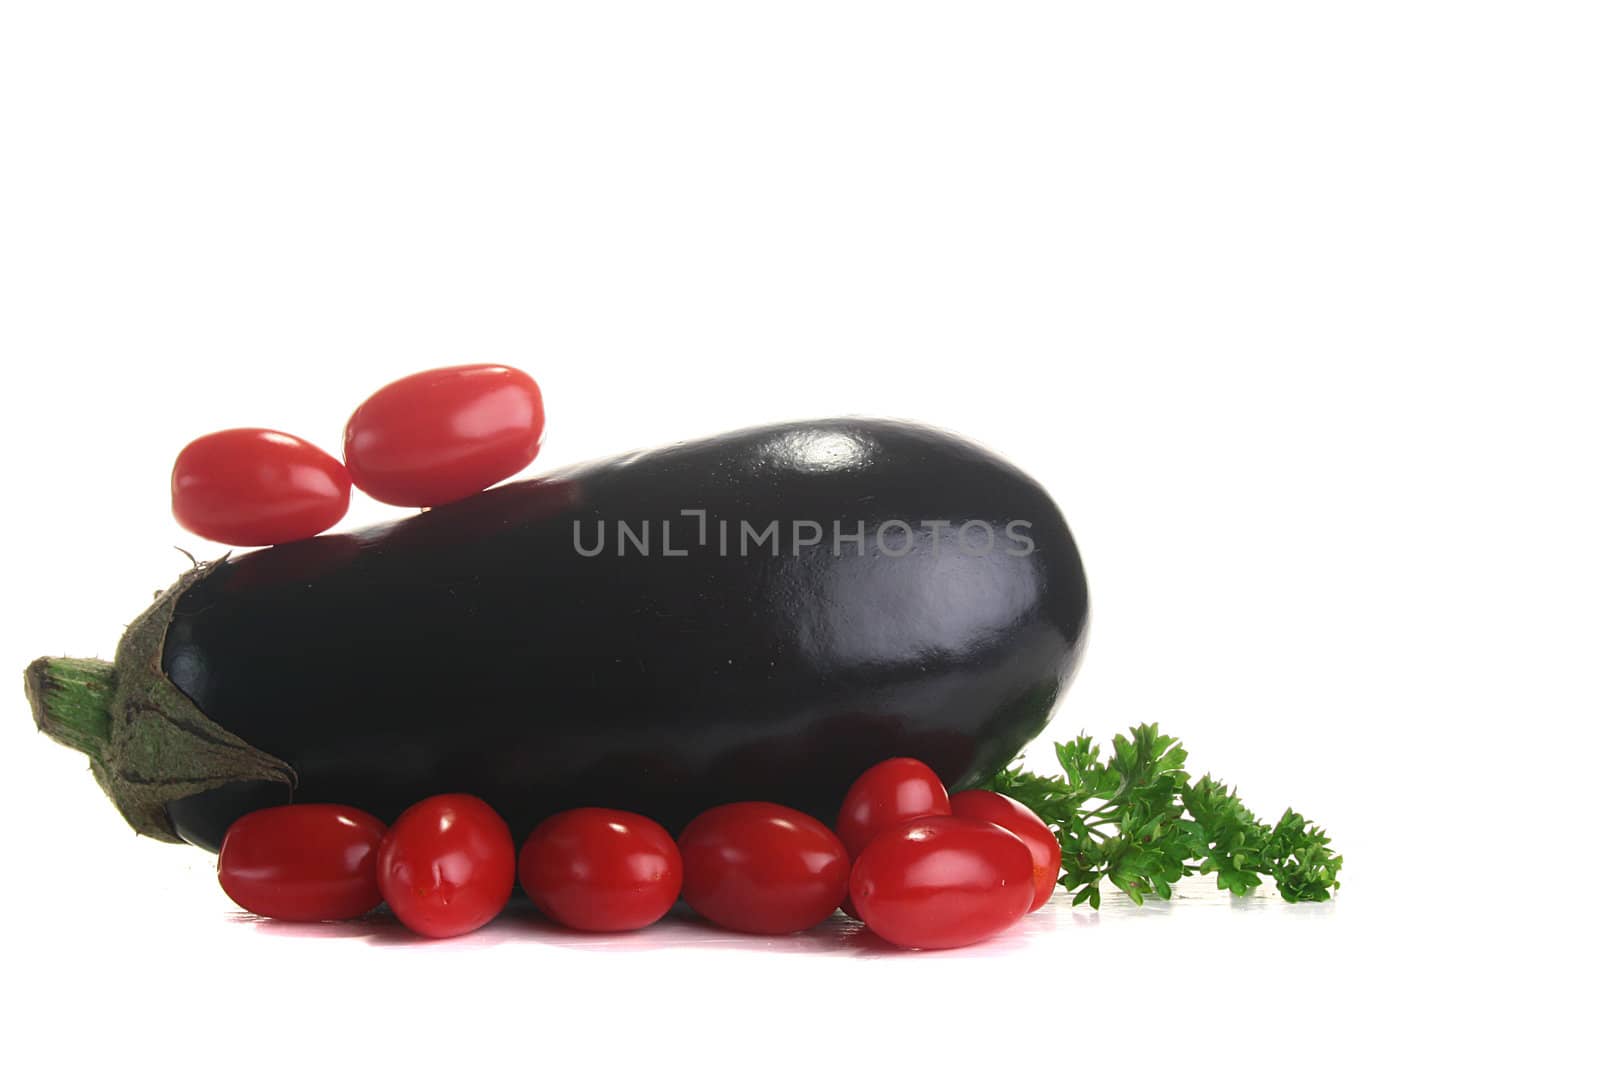 Eggplant with small tomatoes and fresh parsley.